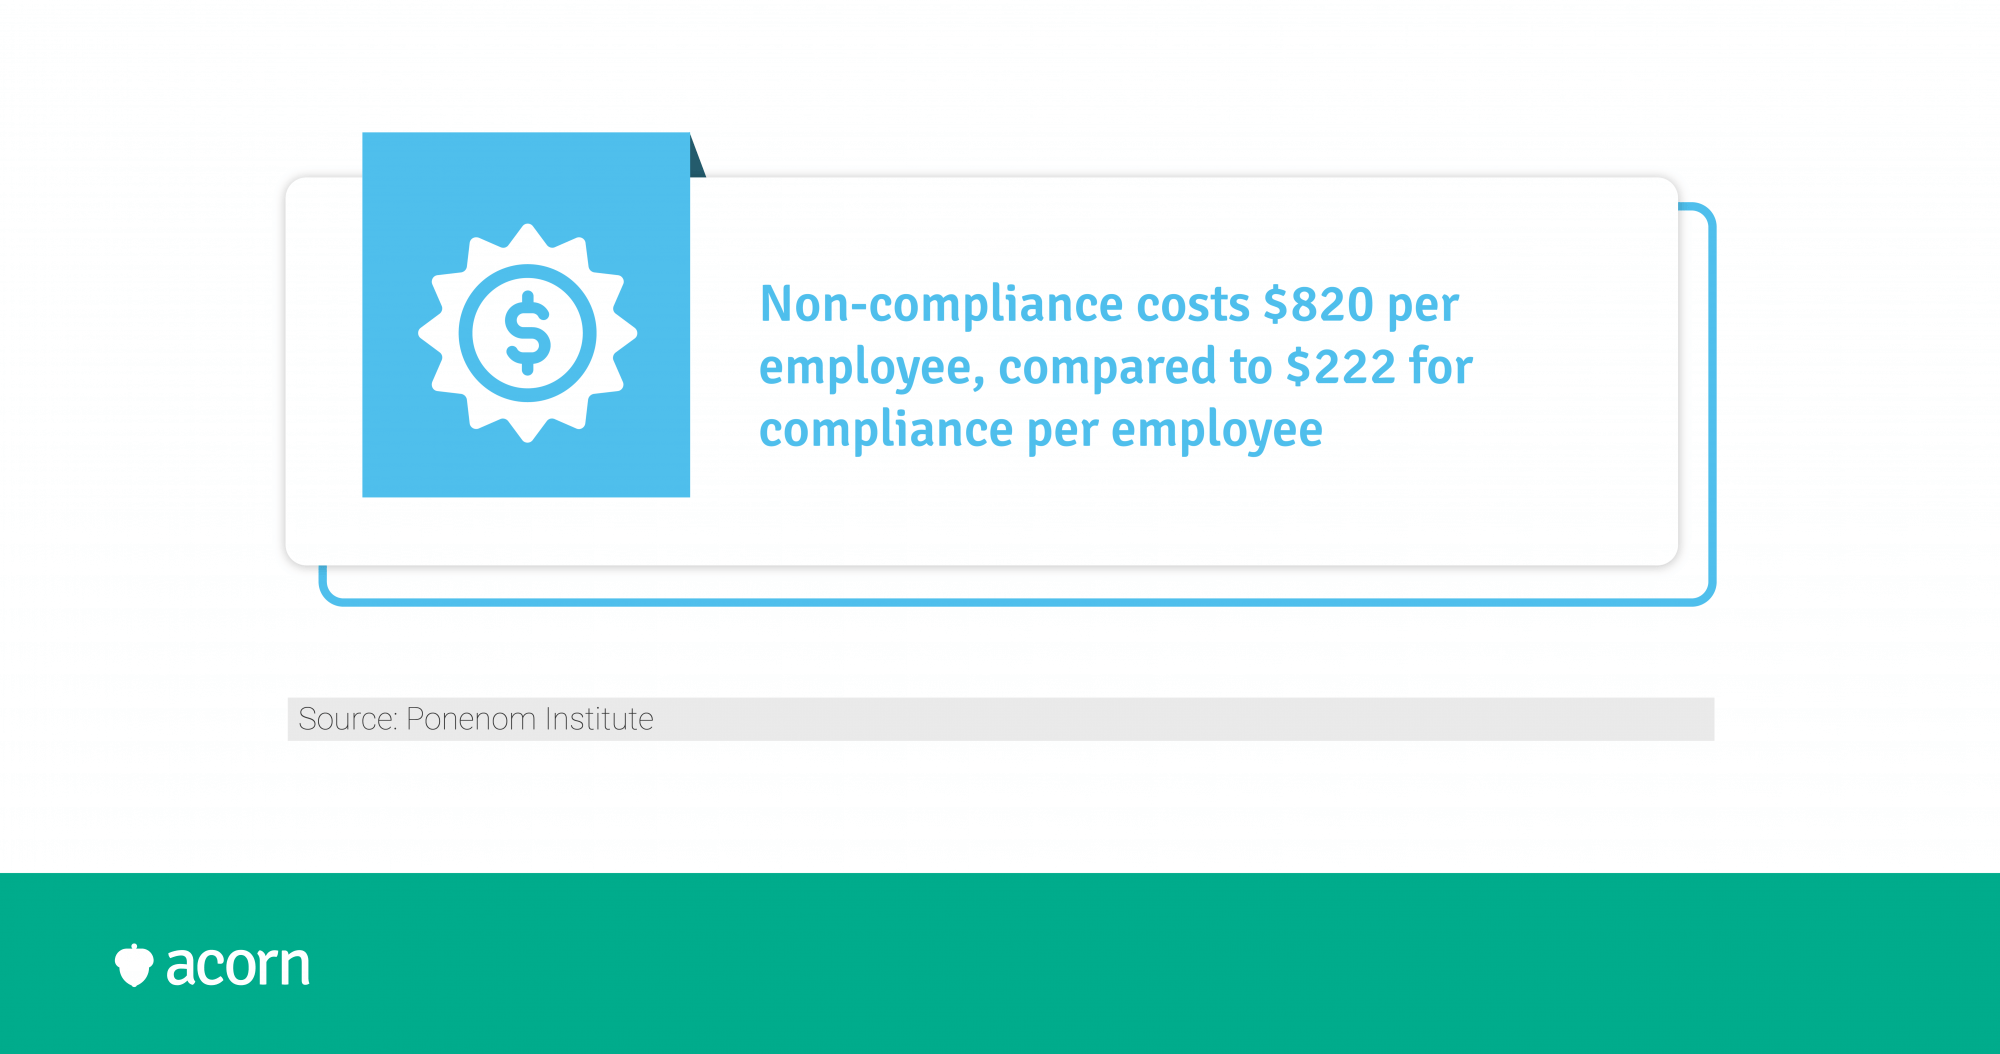 statistic showing non-compliance costs four times what compliance does per employee